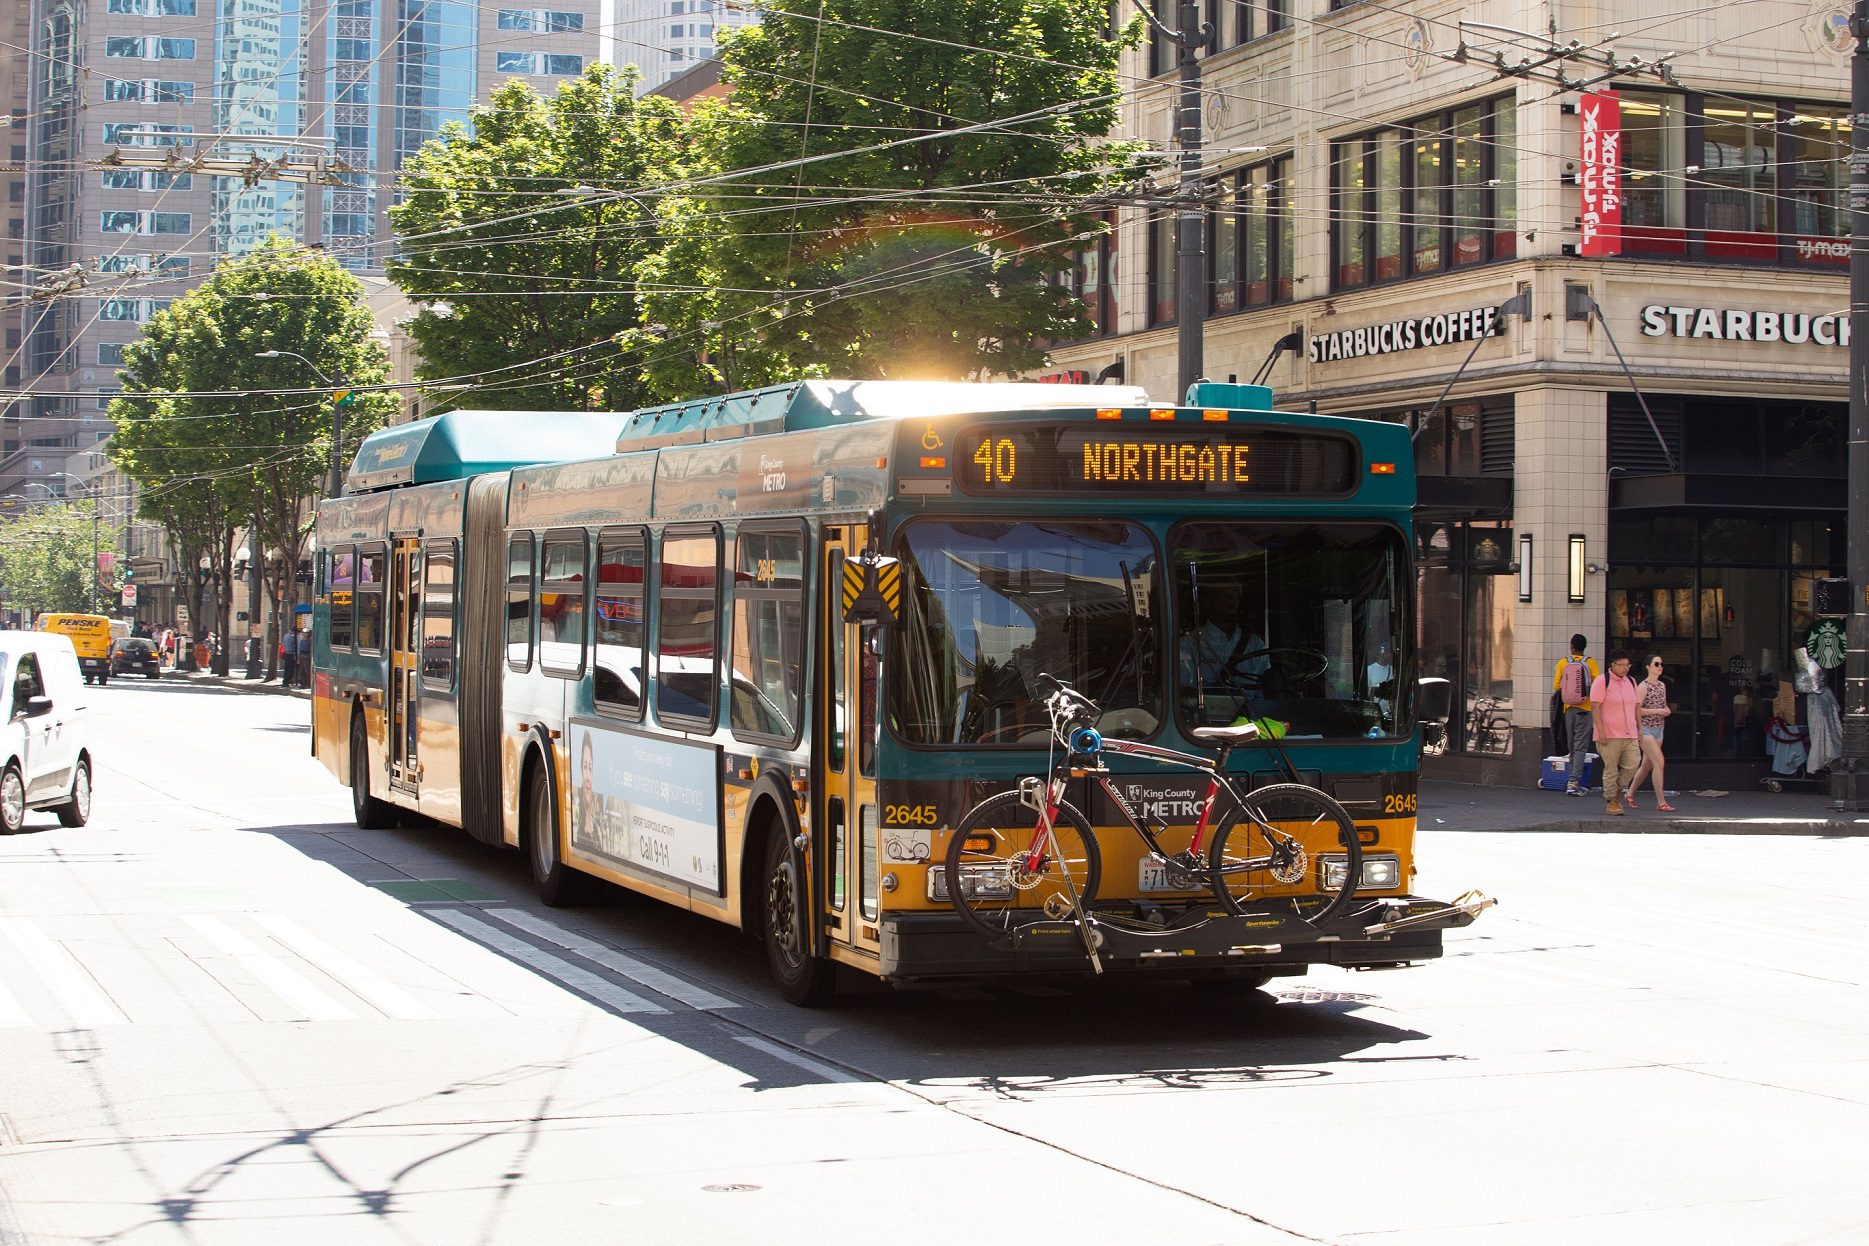 A bus travels down the street in front of large buildings on a sunny day.